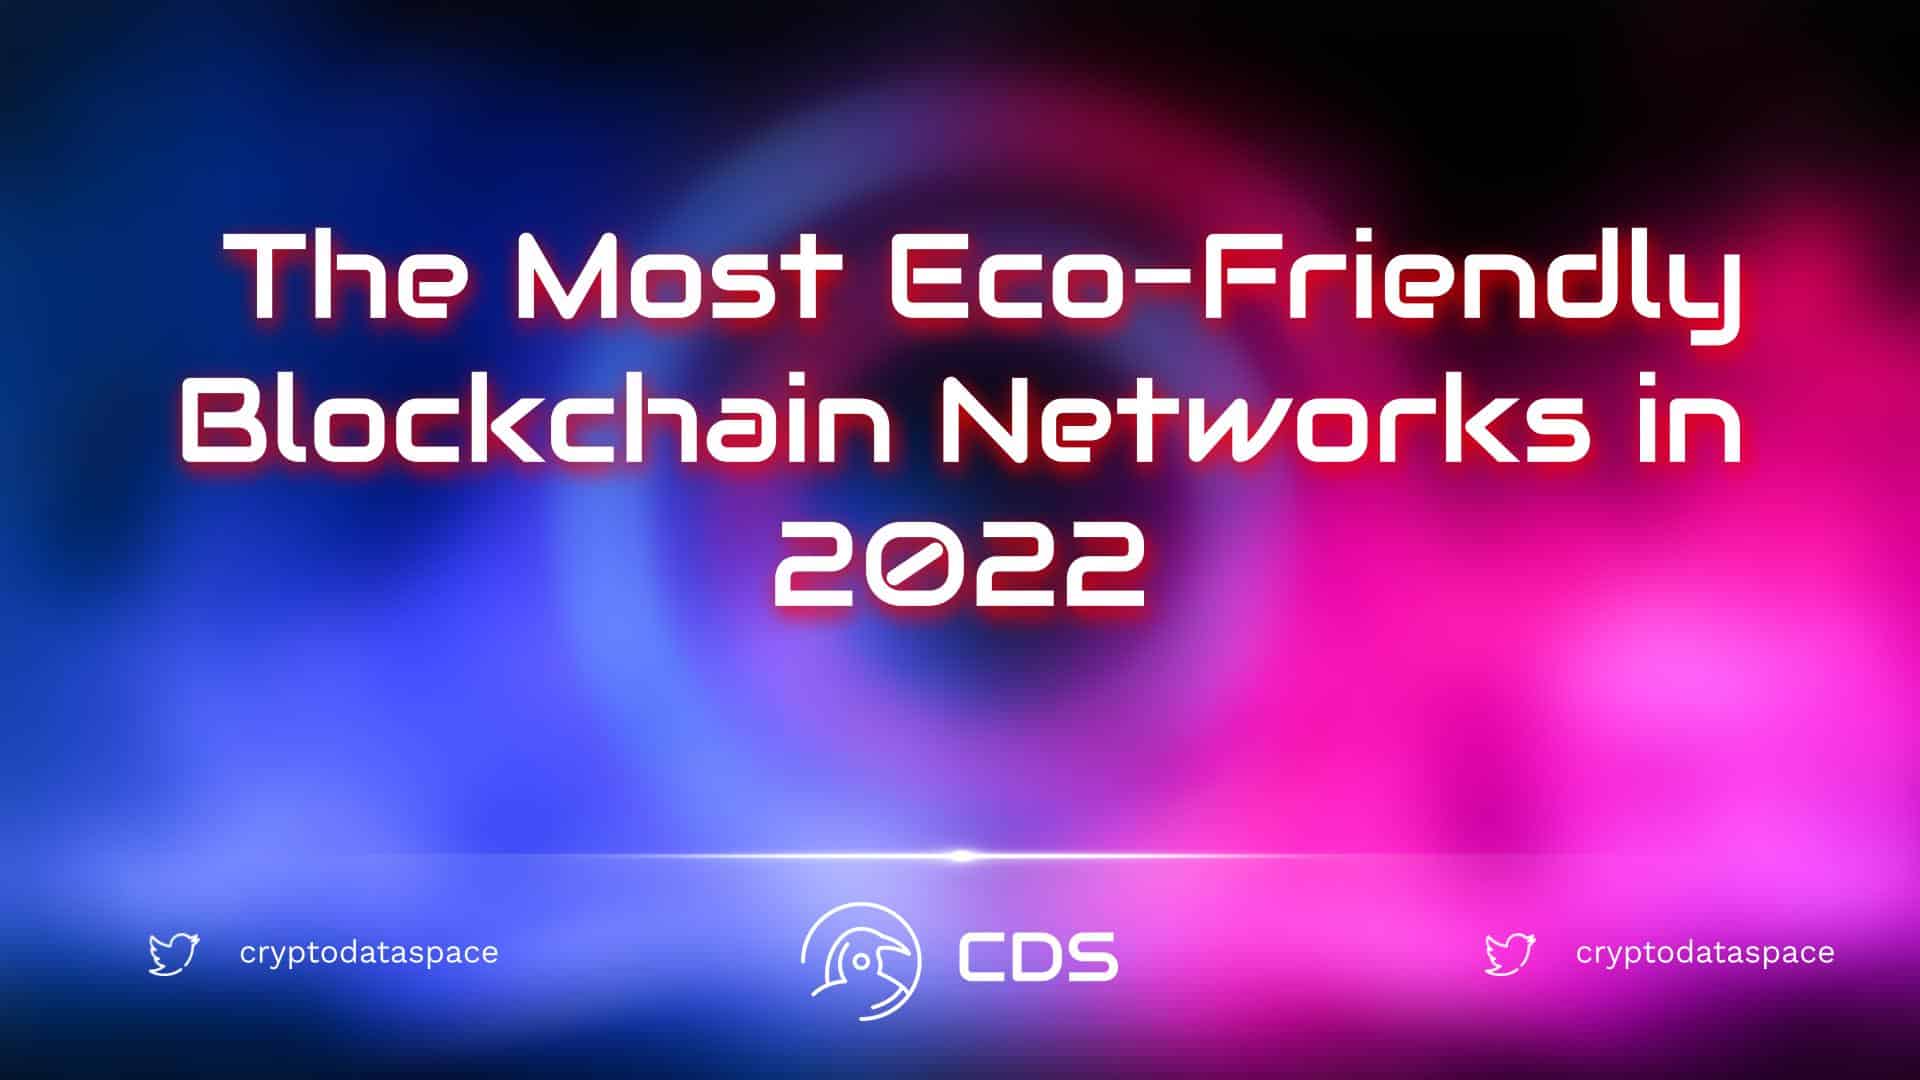 The Most Eco-Friendly Blockchain Networks in 2022